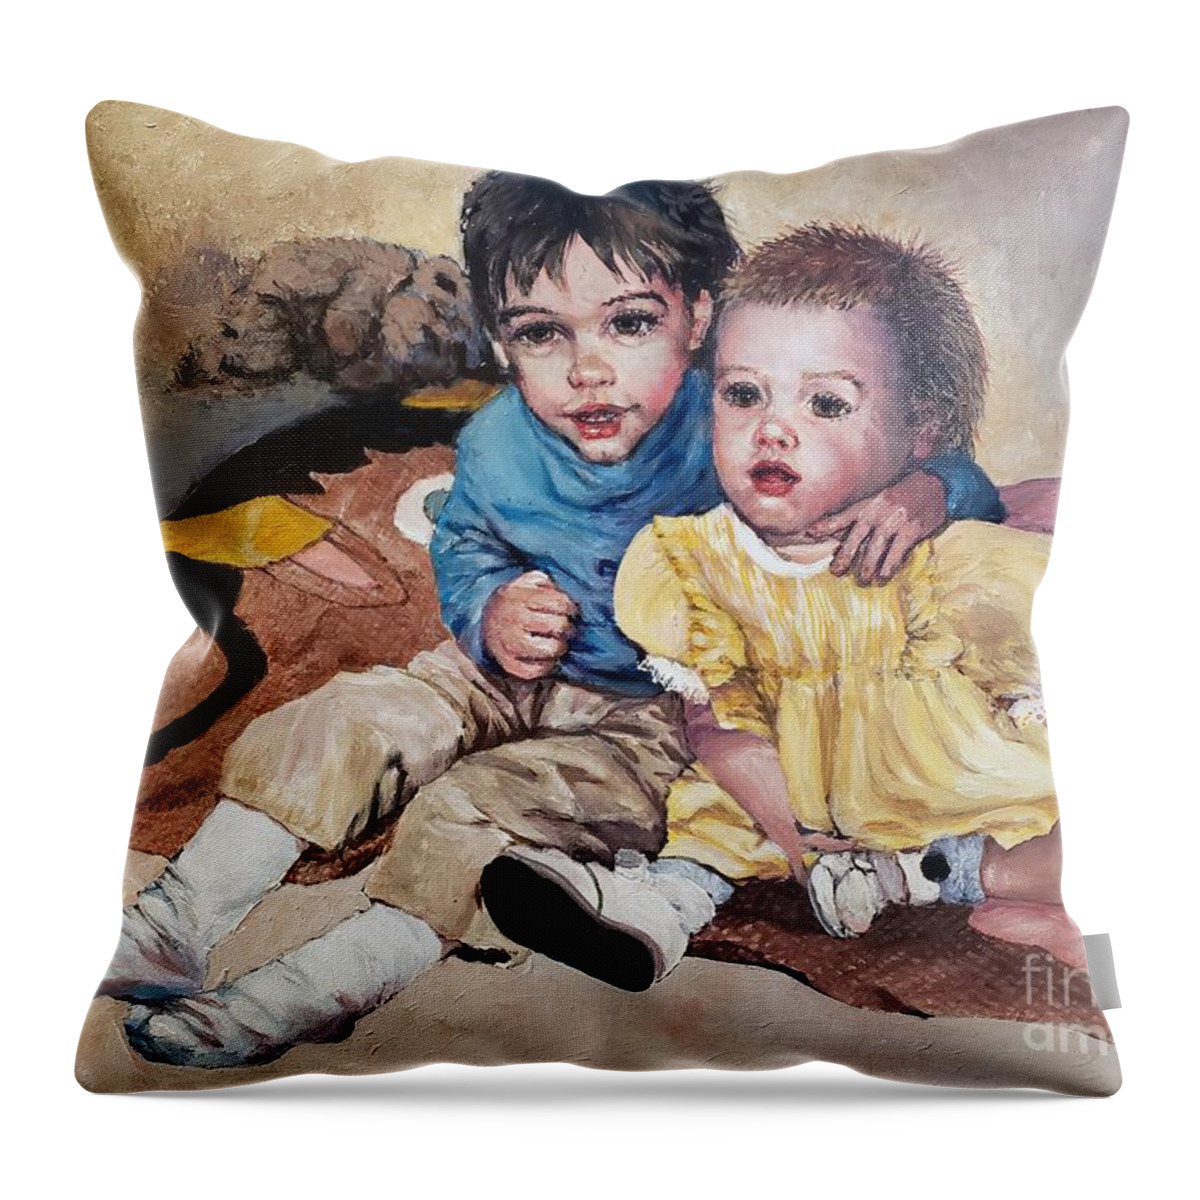 Children Throw Pillow featuring the painting Dynamic Duo by Merana Cadorette